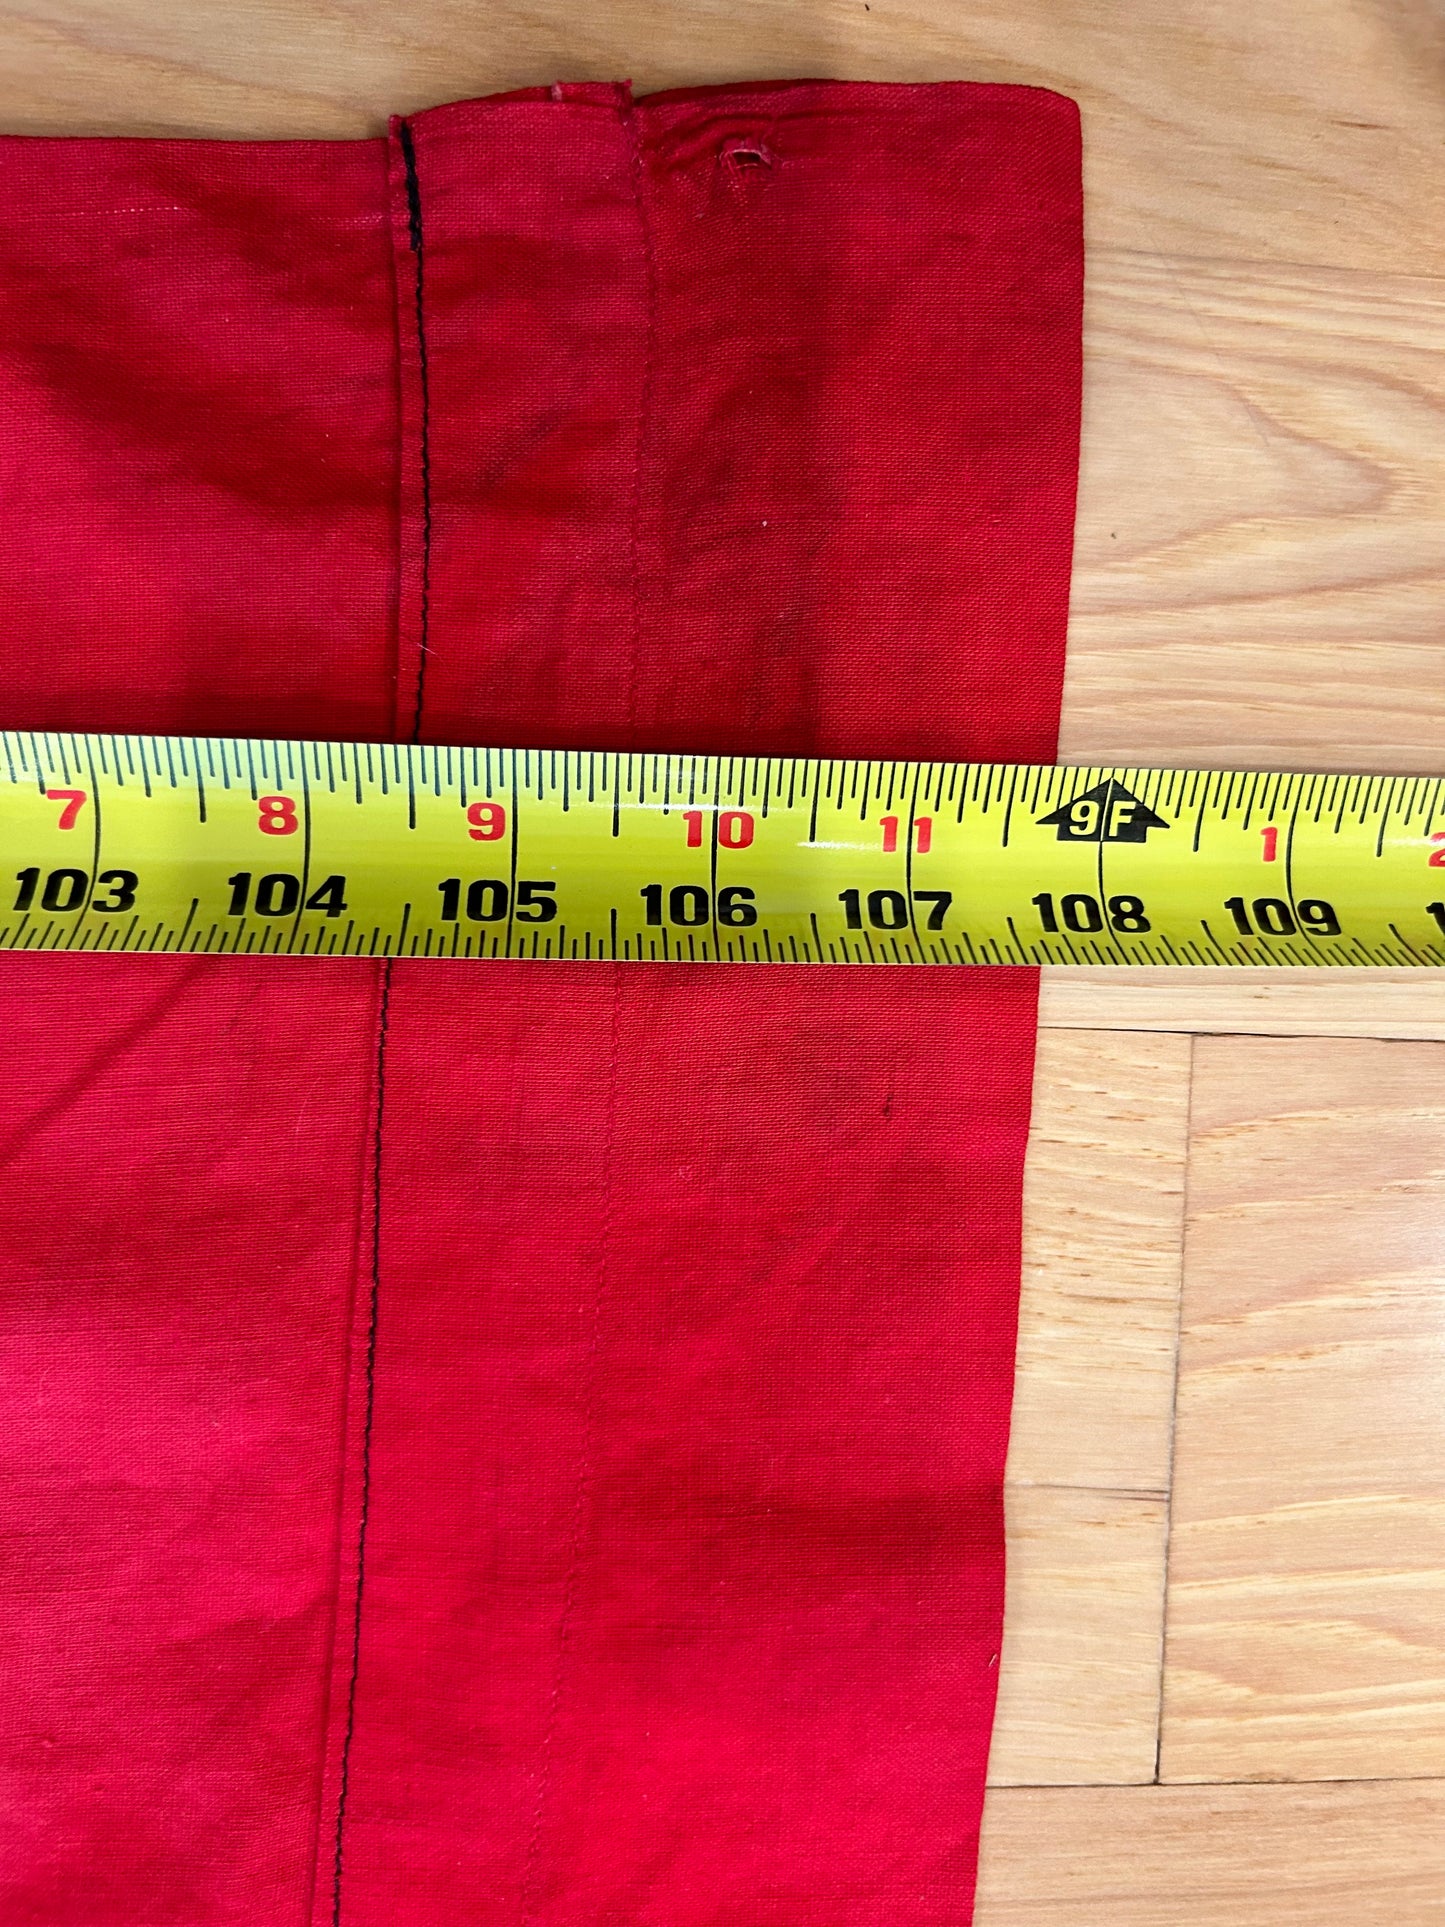 Massive 9x5 Ft NSDAP flag with slight condition issues